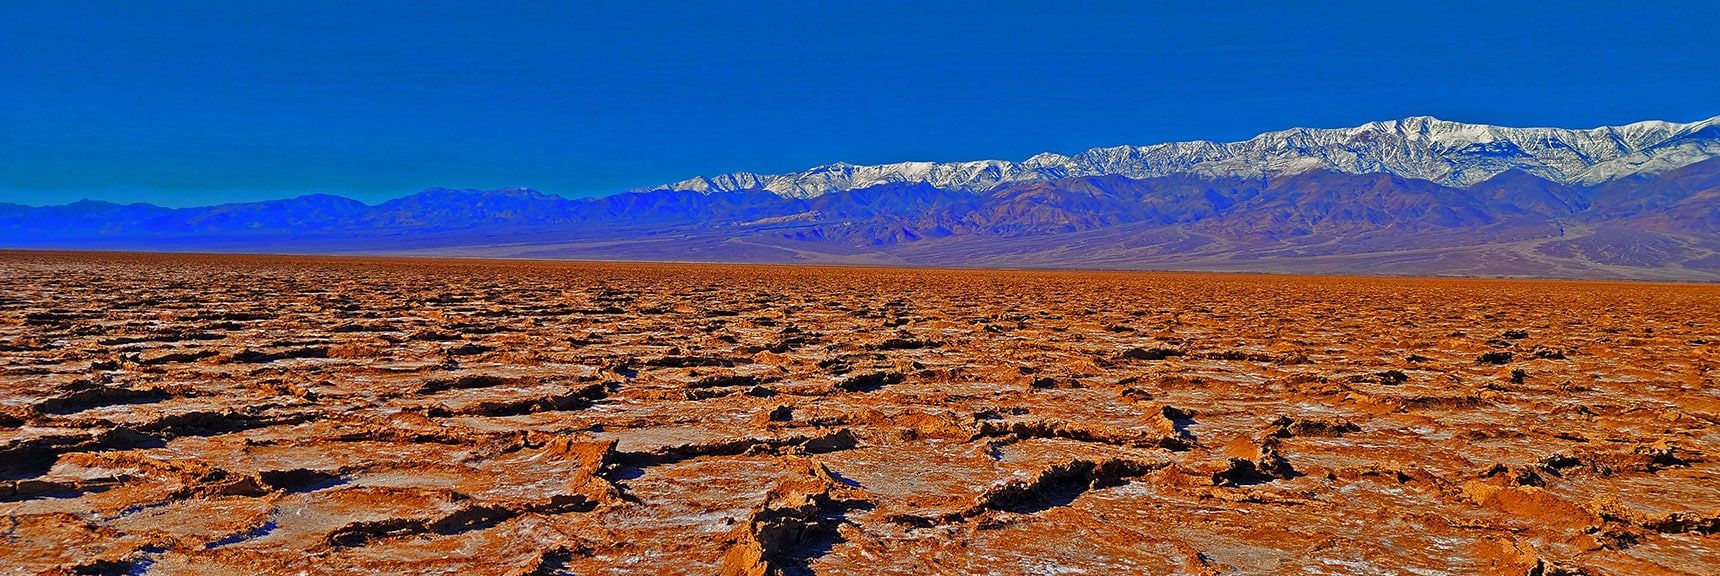 Cool Geometric Shapes Midway Along. Missing Sharp Ridges is Like Running on Railroad Ties | Death Valley Crossing | Death Valley National Park, California | David Smith | LasVegasAreaTrails.com